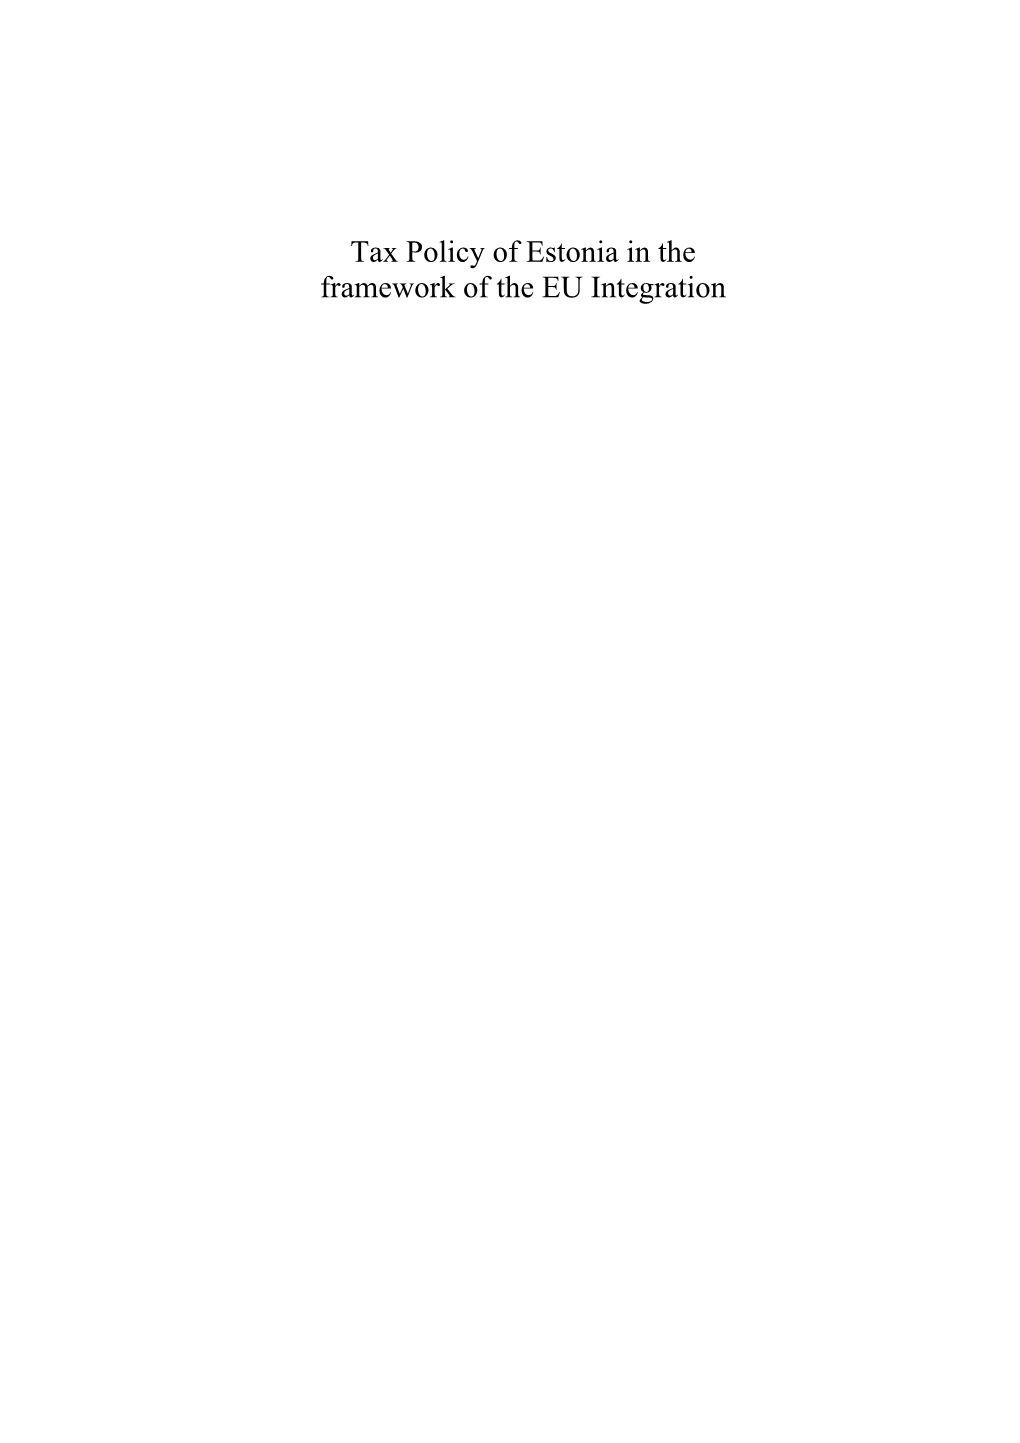 Tax Policy of Estonia in the Framework of the EU Integration